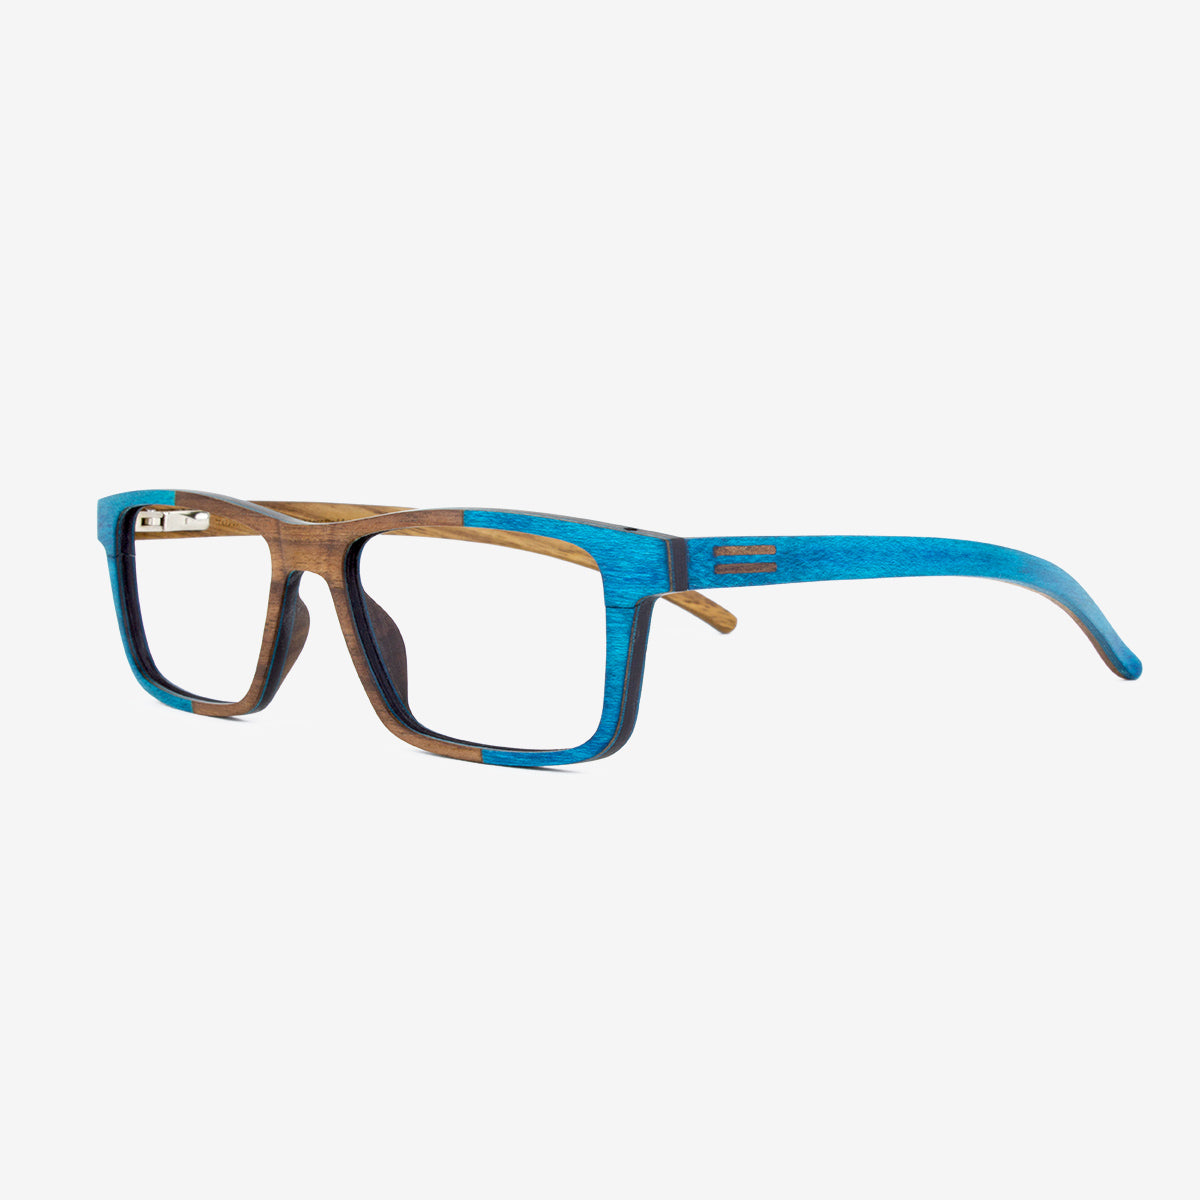 Handcrafted Turquoise and walnut Wood eyeglass frames